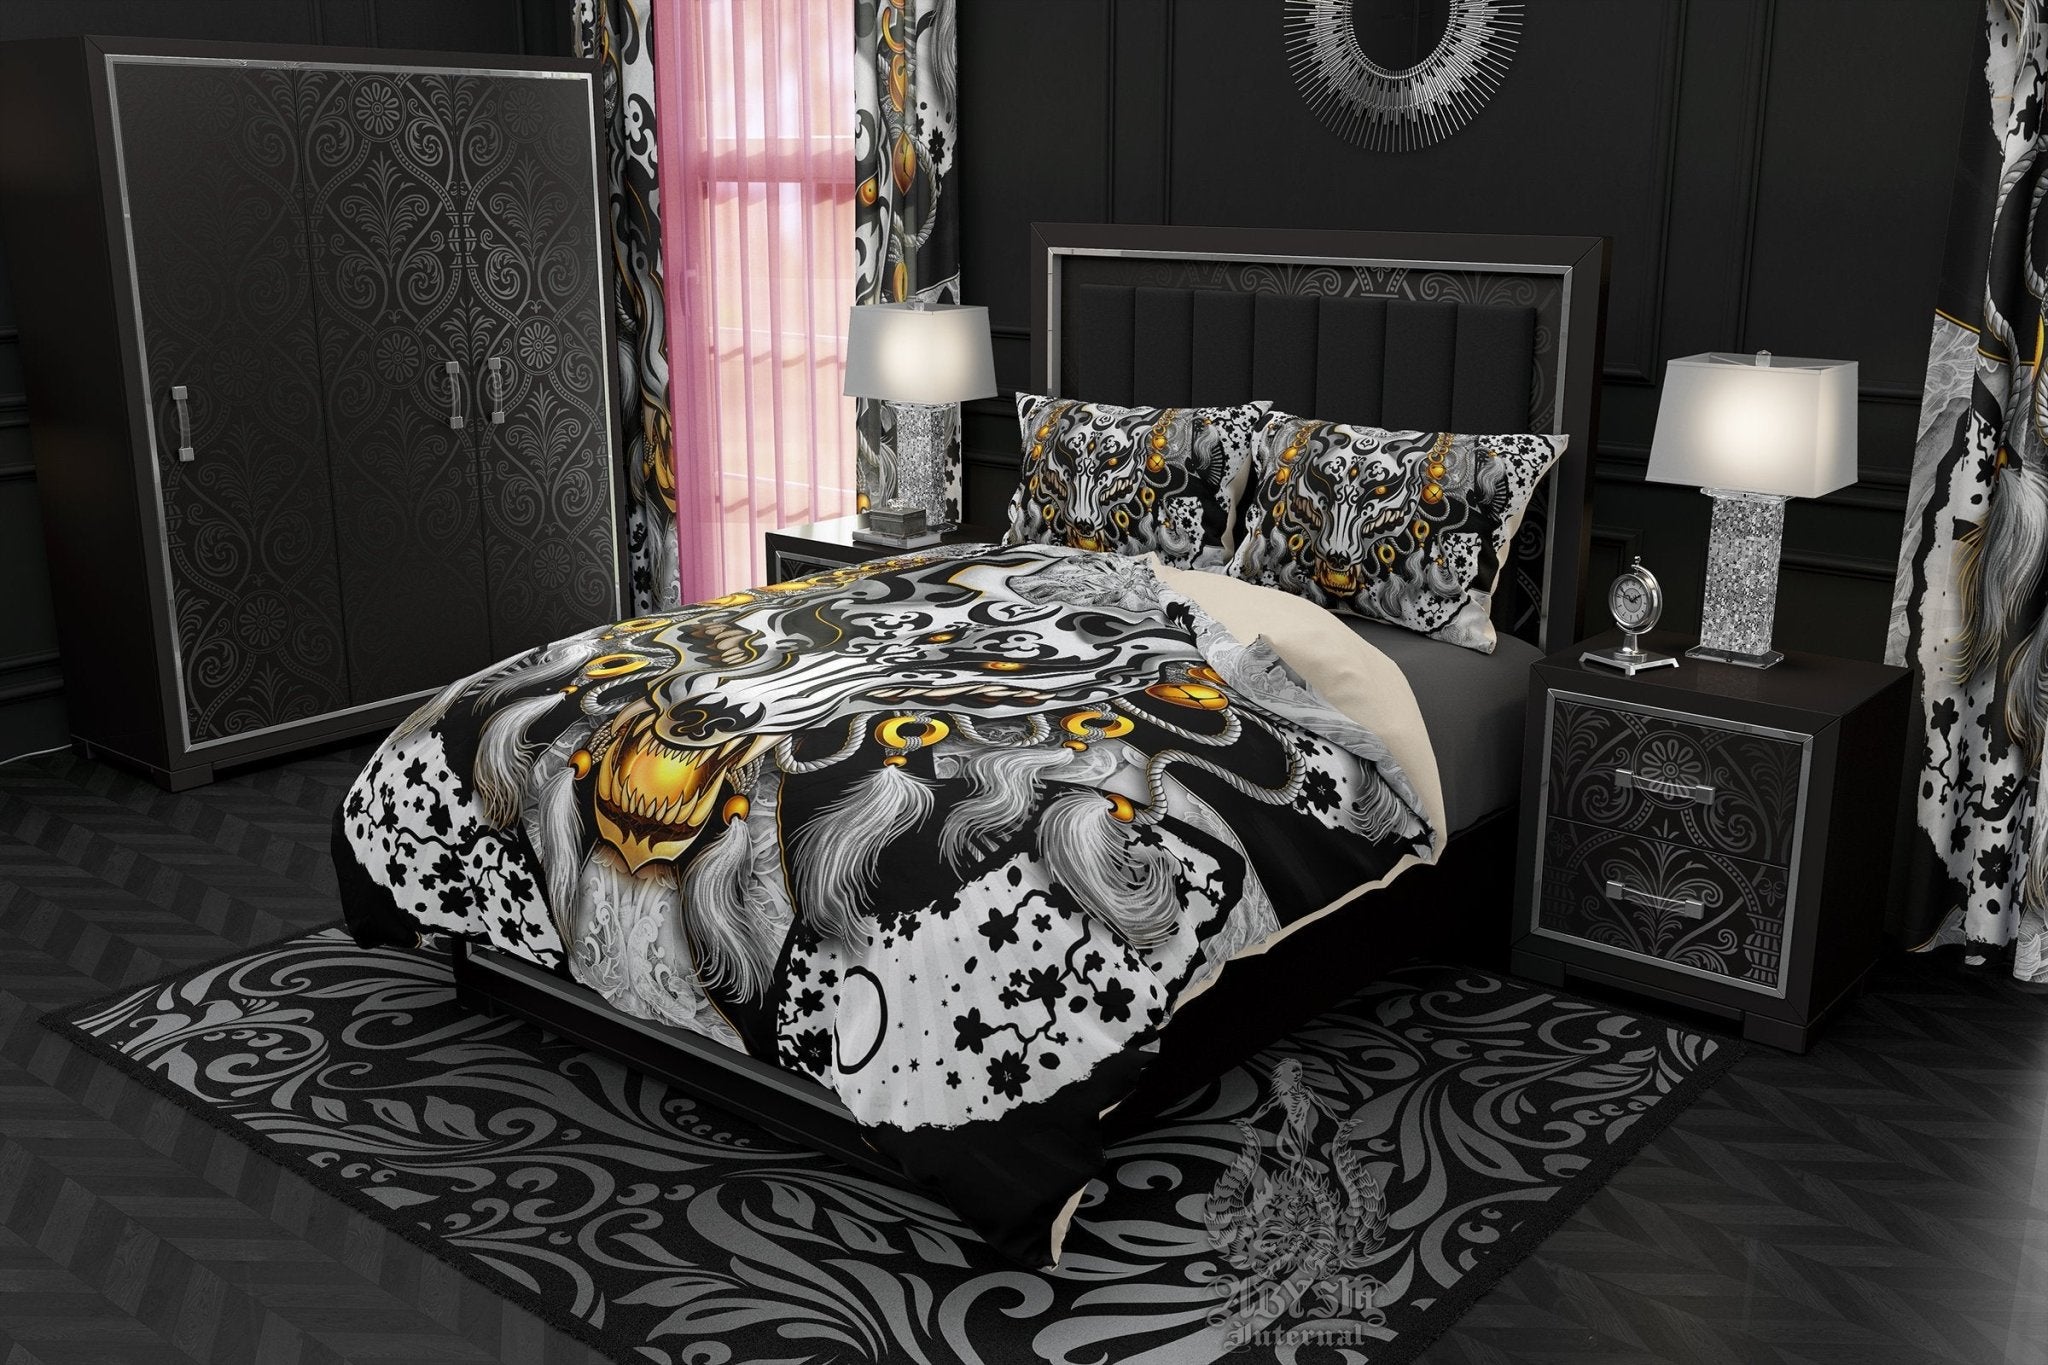 Kitsune Mask Bedding Set, Comforter and Duvet, Gamer Bed Cover and Bedroom Decor, Fox Okami, Anime Art, King, Queen and Twin Size - Black and White Goth II - Abysm Internal